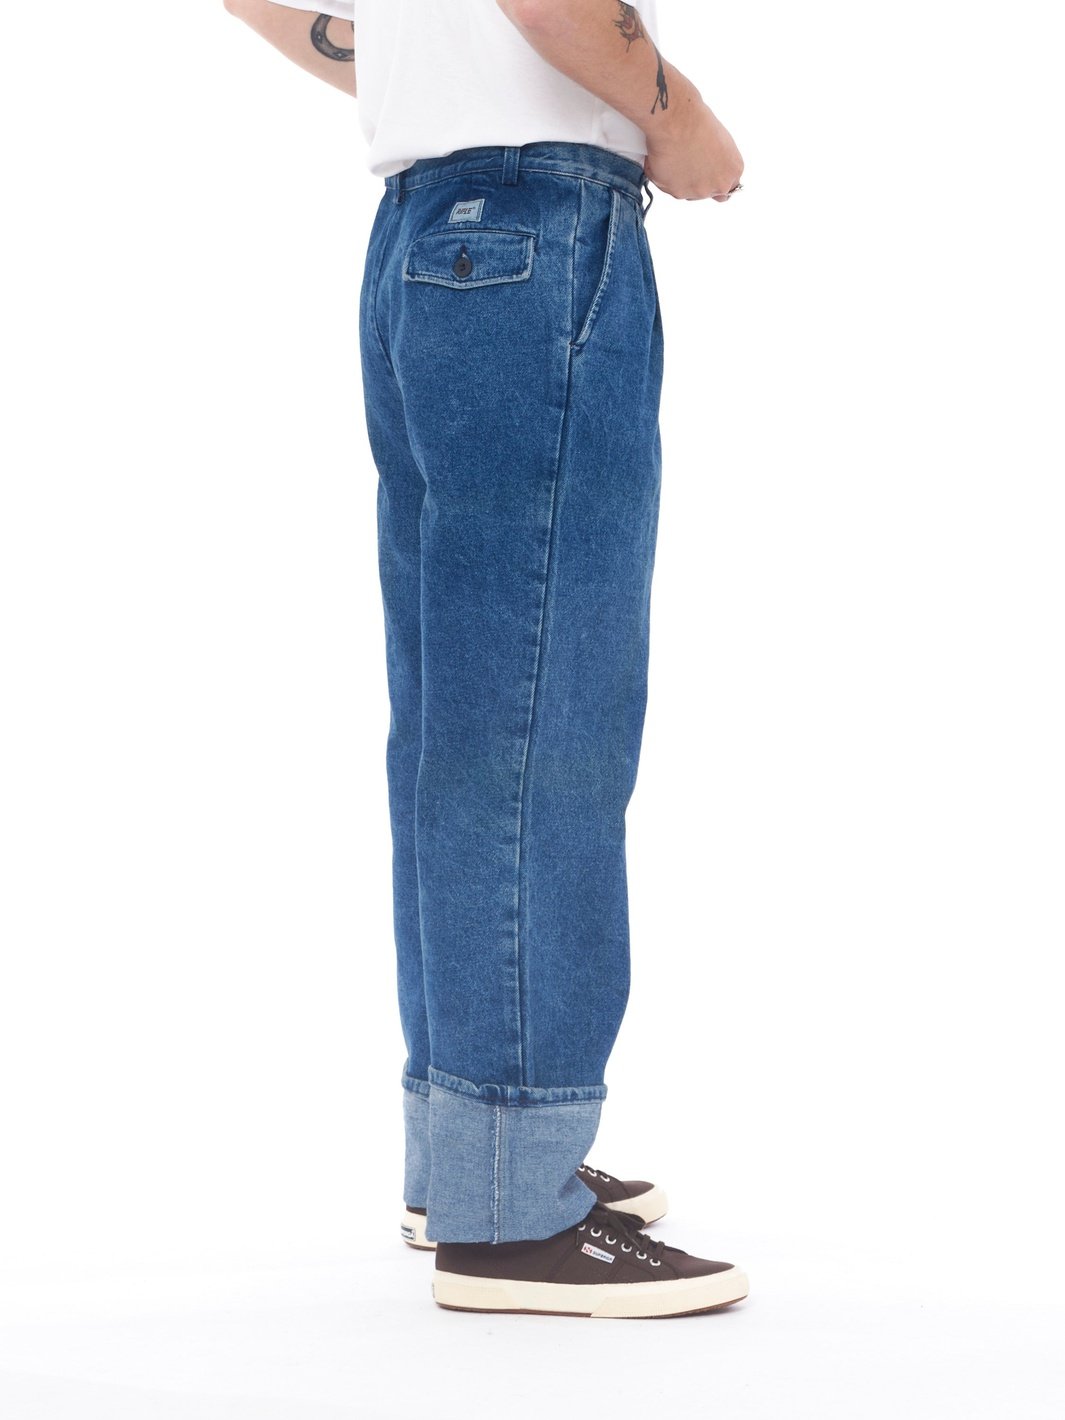 Y2K Rifle baggy jeans